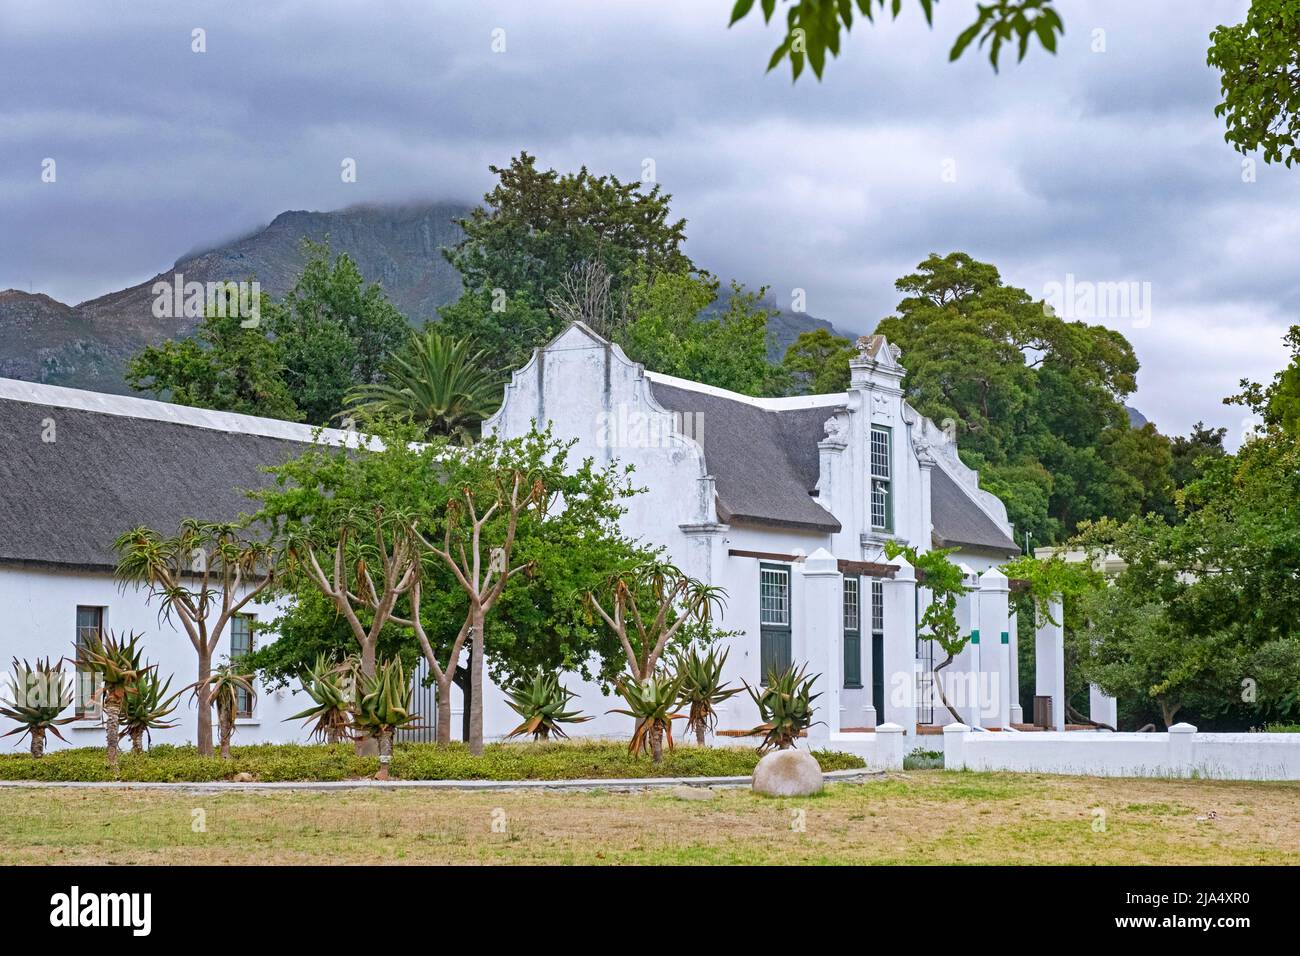 Toy And Miniature Museum, former 18th century parsonage in typical Cape Dutch style at Stellenbosch, Cape Winelands, Western Cape, South Africa Stock Photo